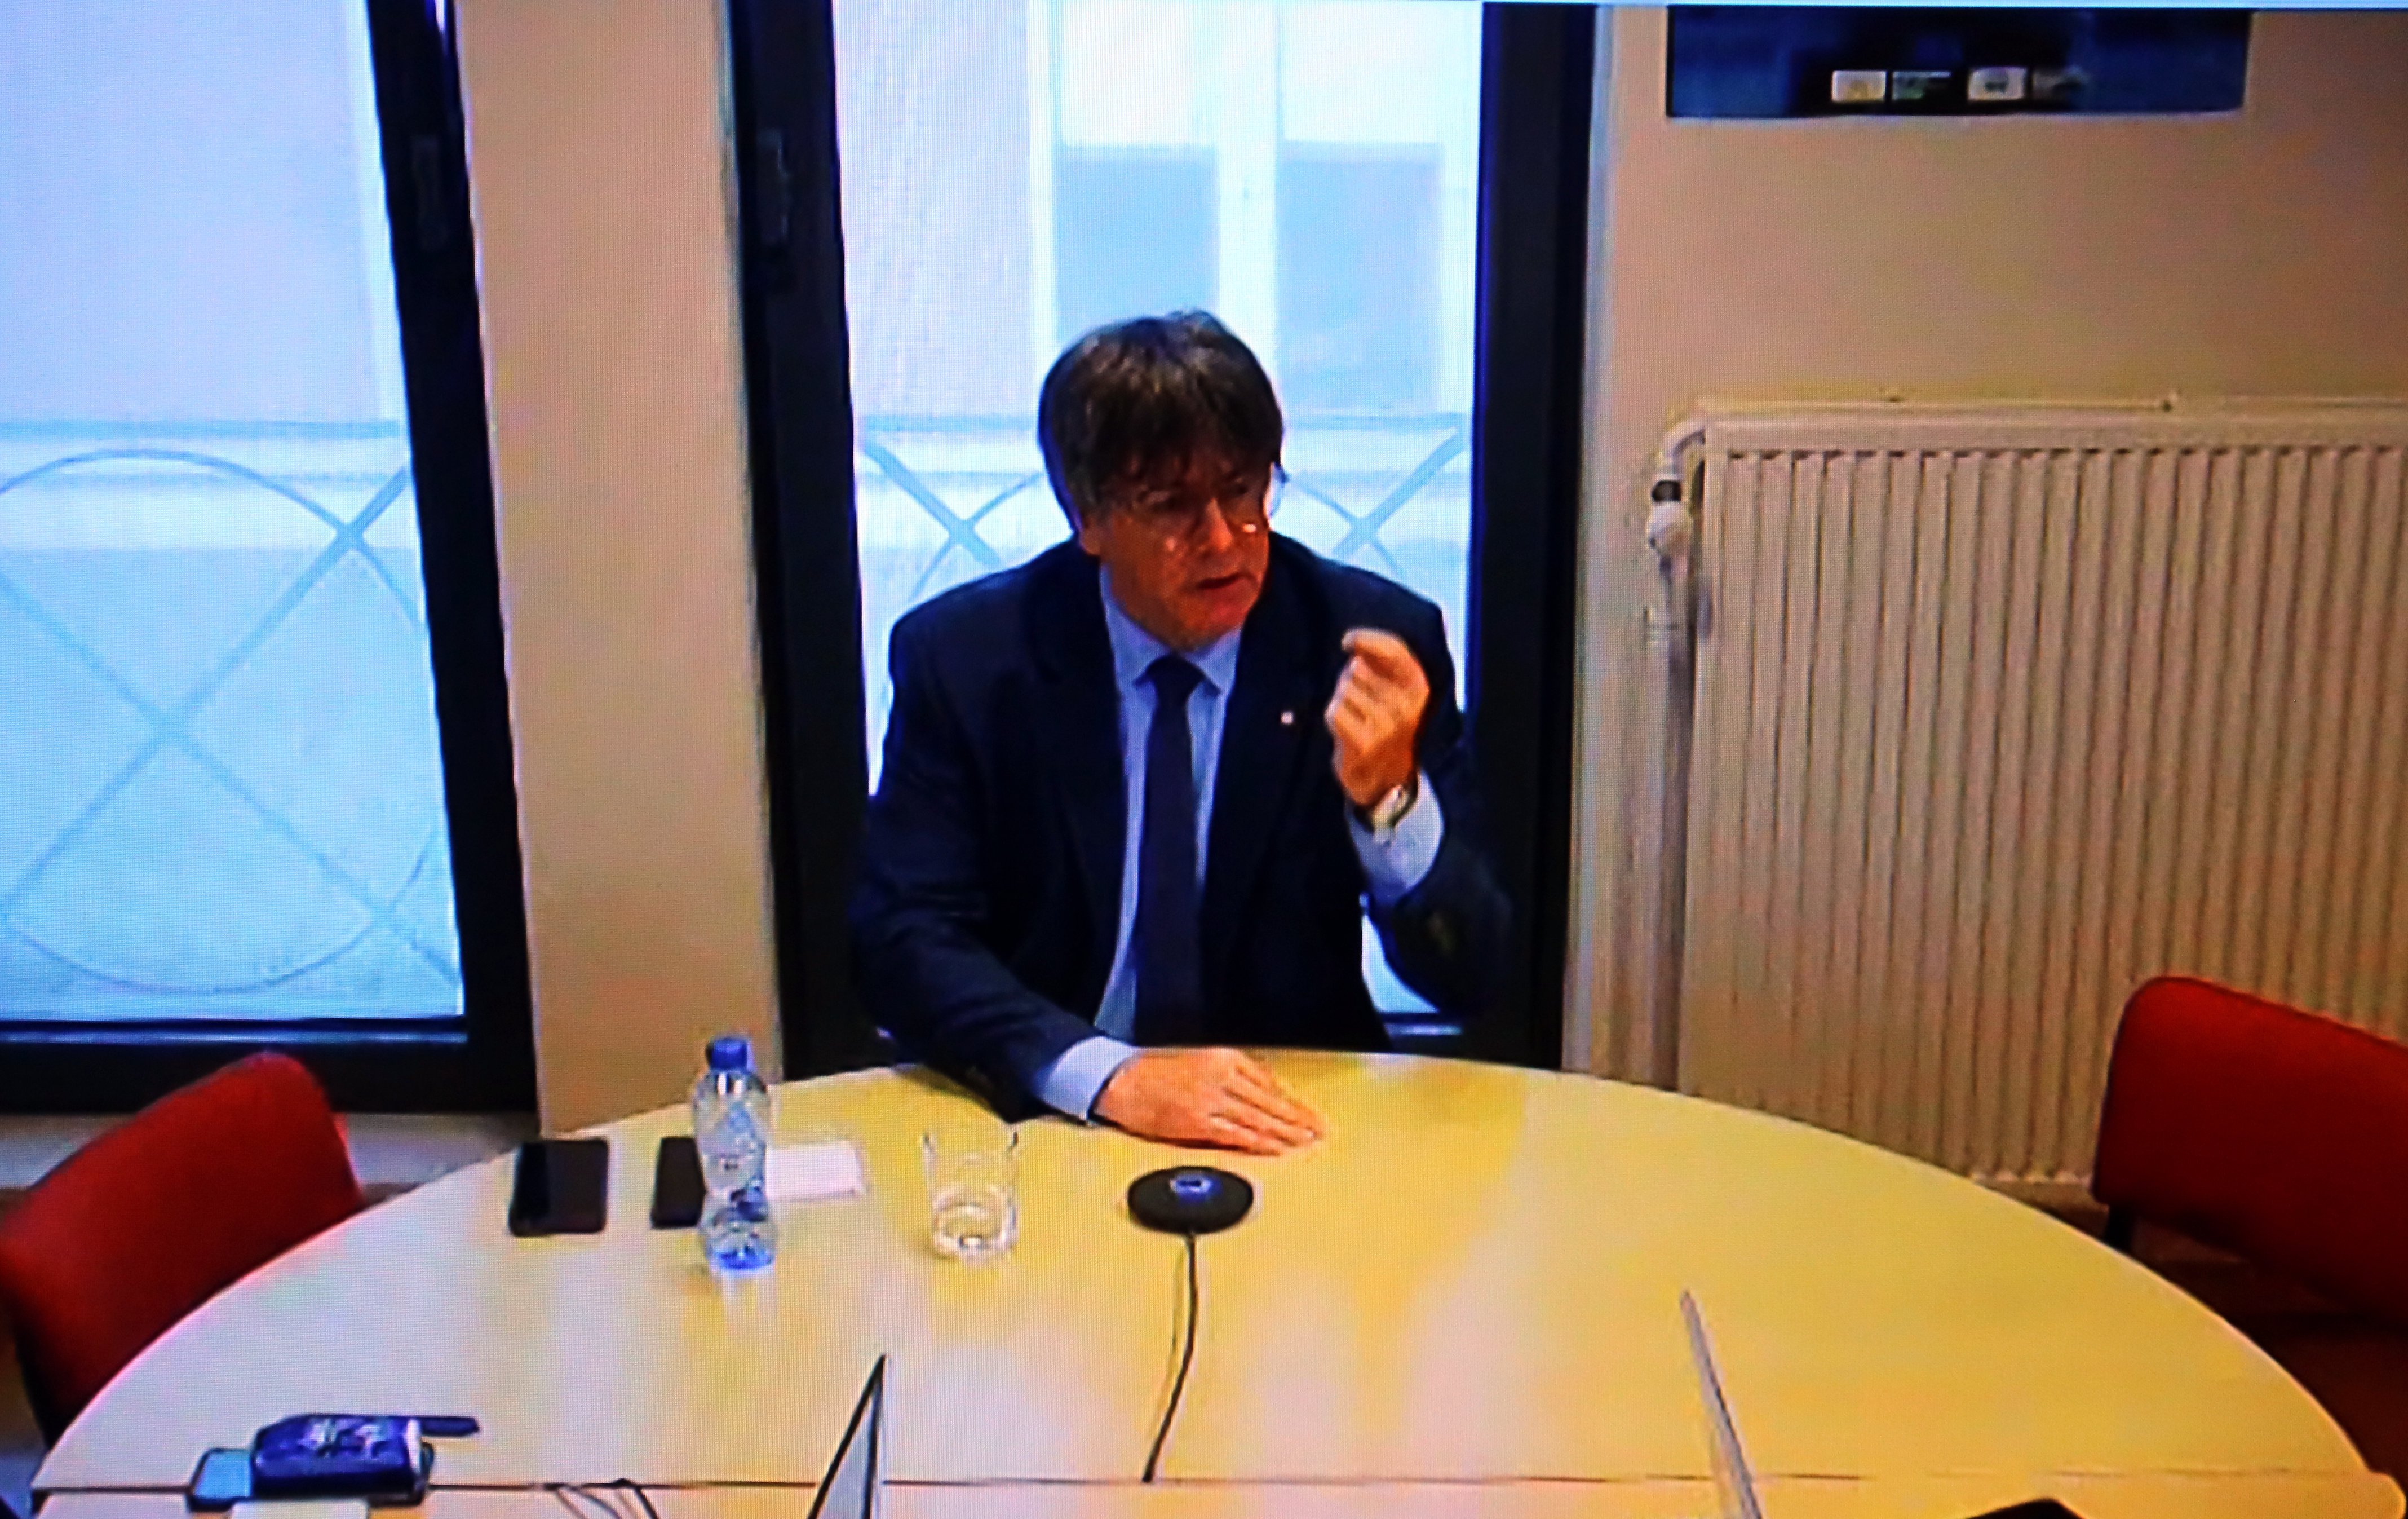 Puigdemont testifies before Spanish judge: "I had no bodyguard, the state illegally prevented it"